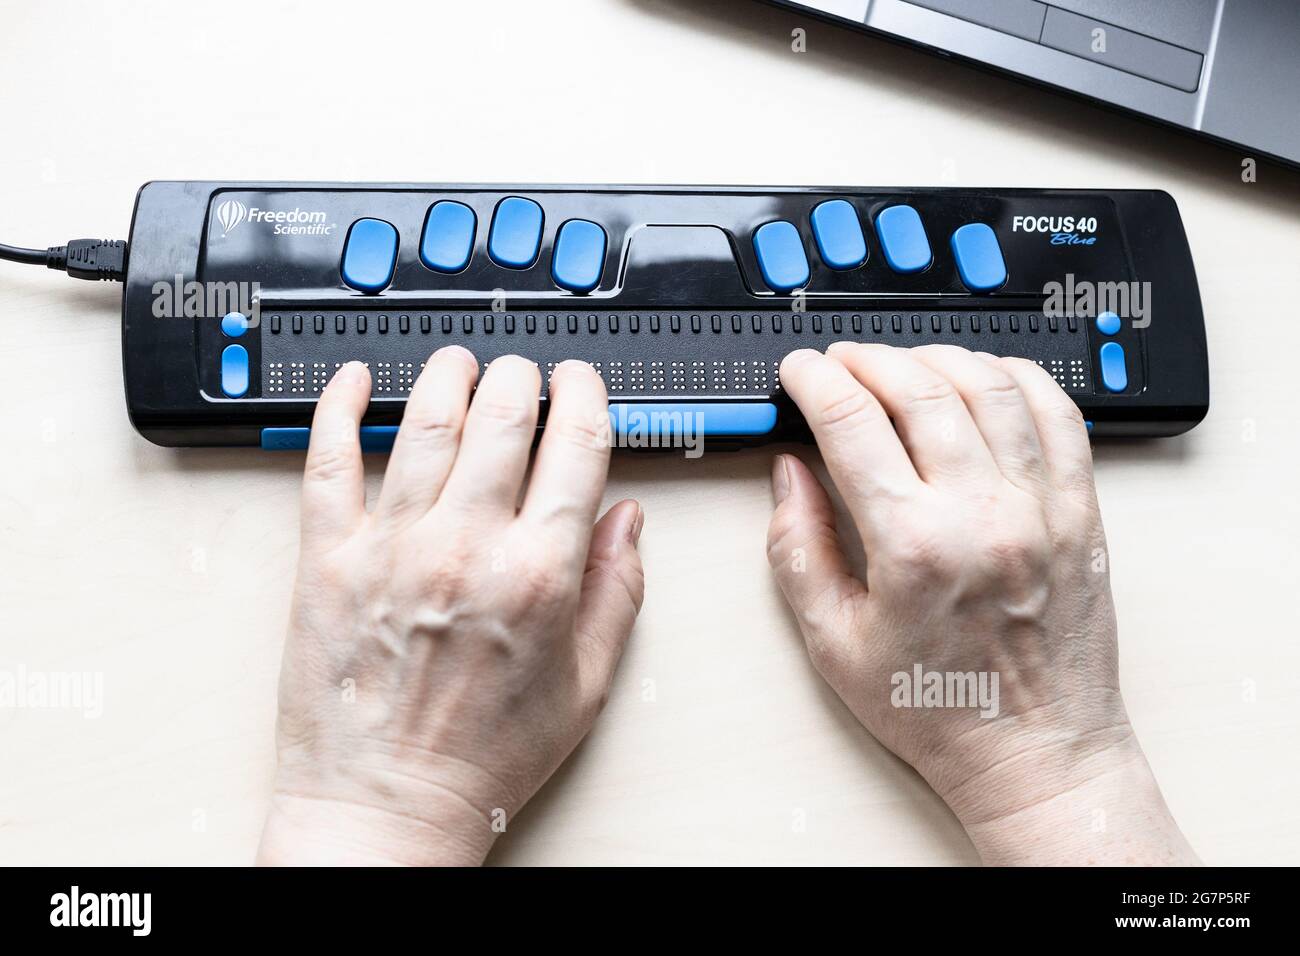 Moscow, Russia - June 5, 2021: female hands touch of Focus 40 Blue Braille  Display. Freedom Scientific is the largest manufacturer of assistive techno  Stock Photo - Alamy